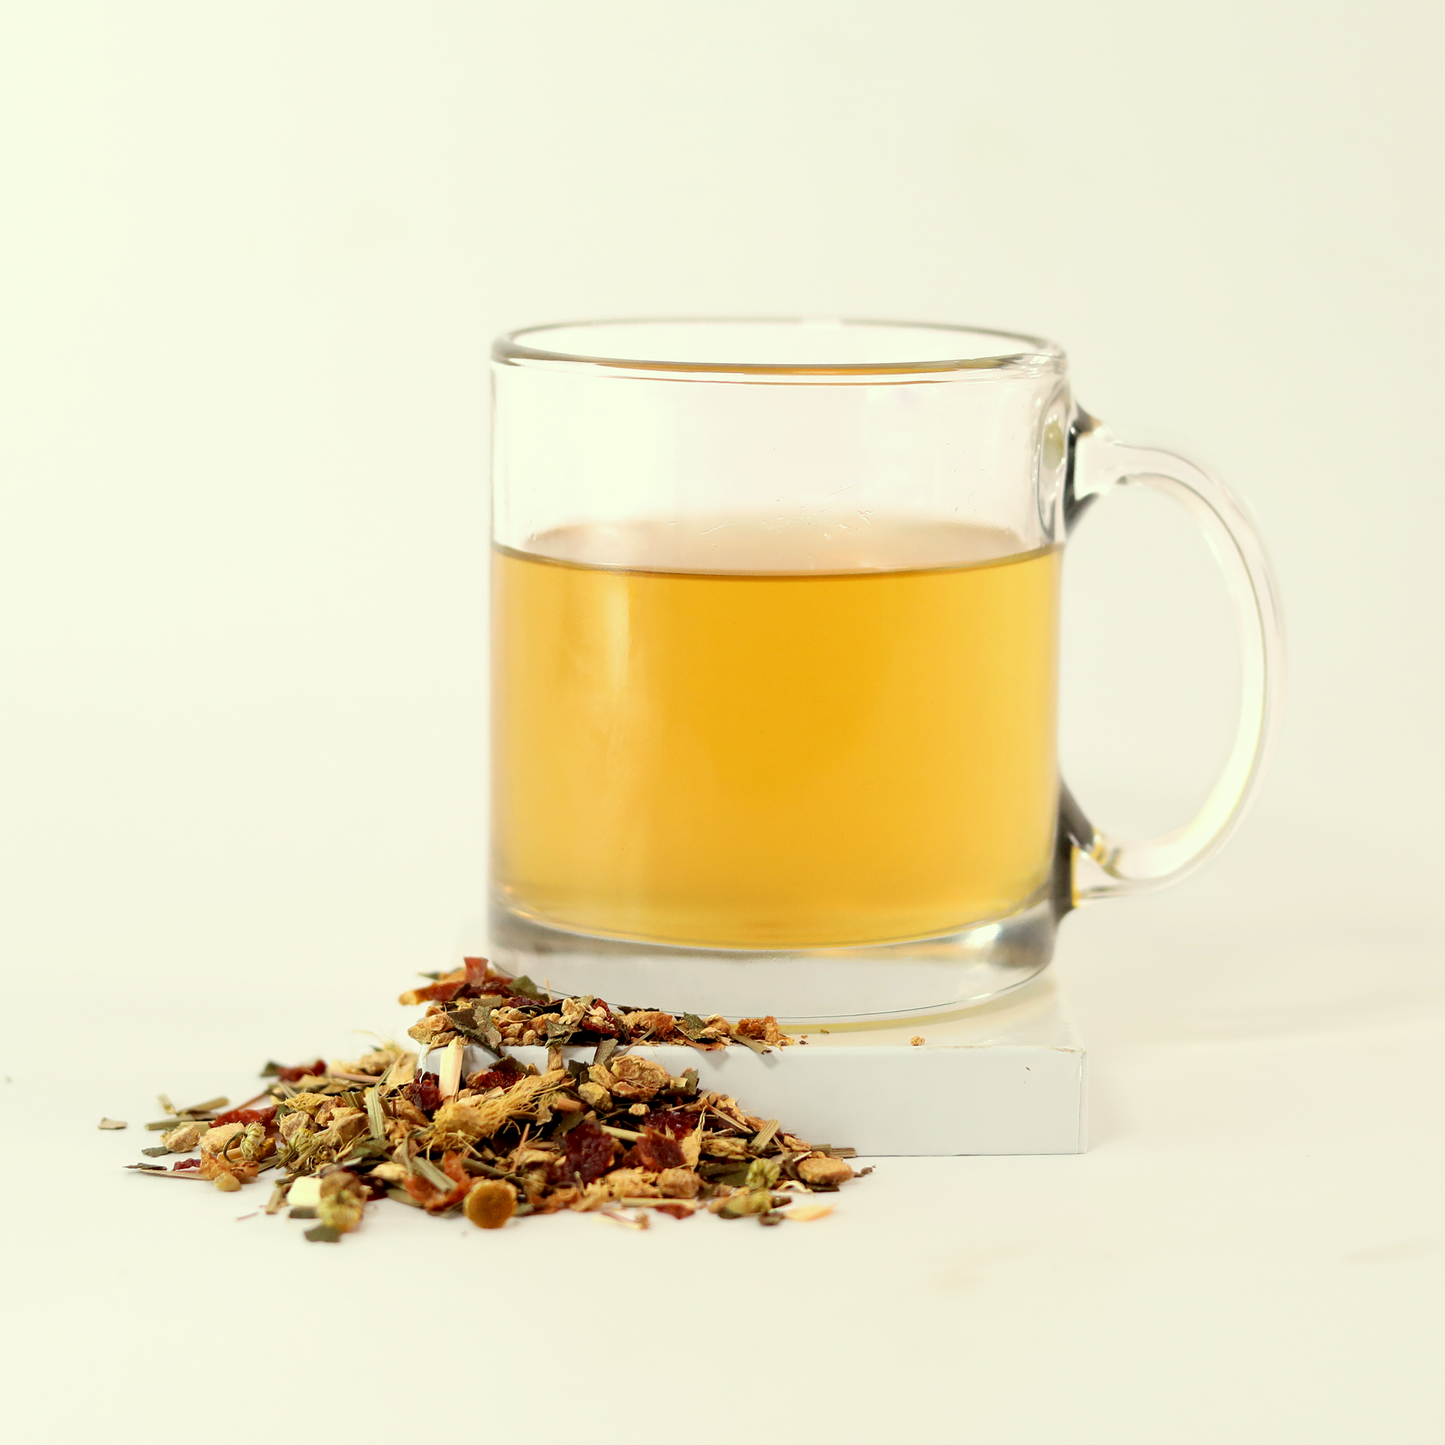  A clear glass mug filled with light yellow tea - Goldenfire Ginger -  next to a small pile of dried tea leaves. A Good Store product.